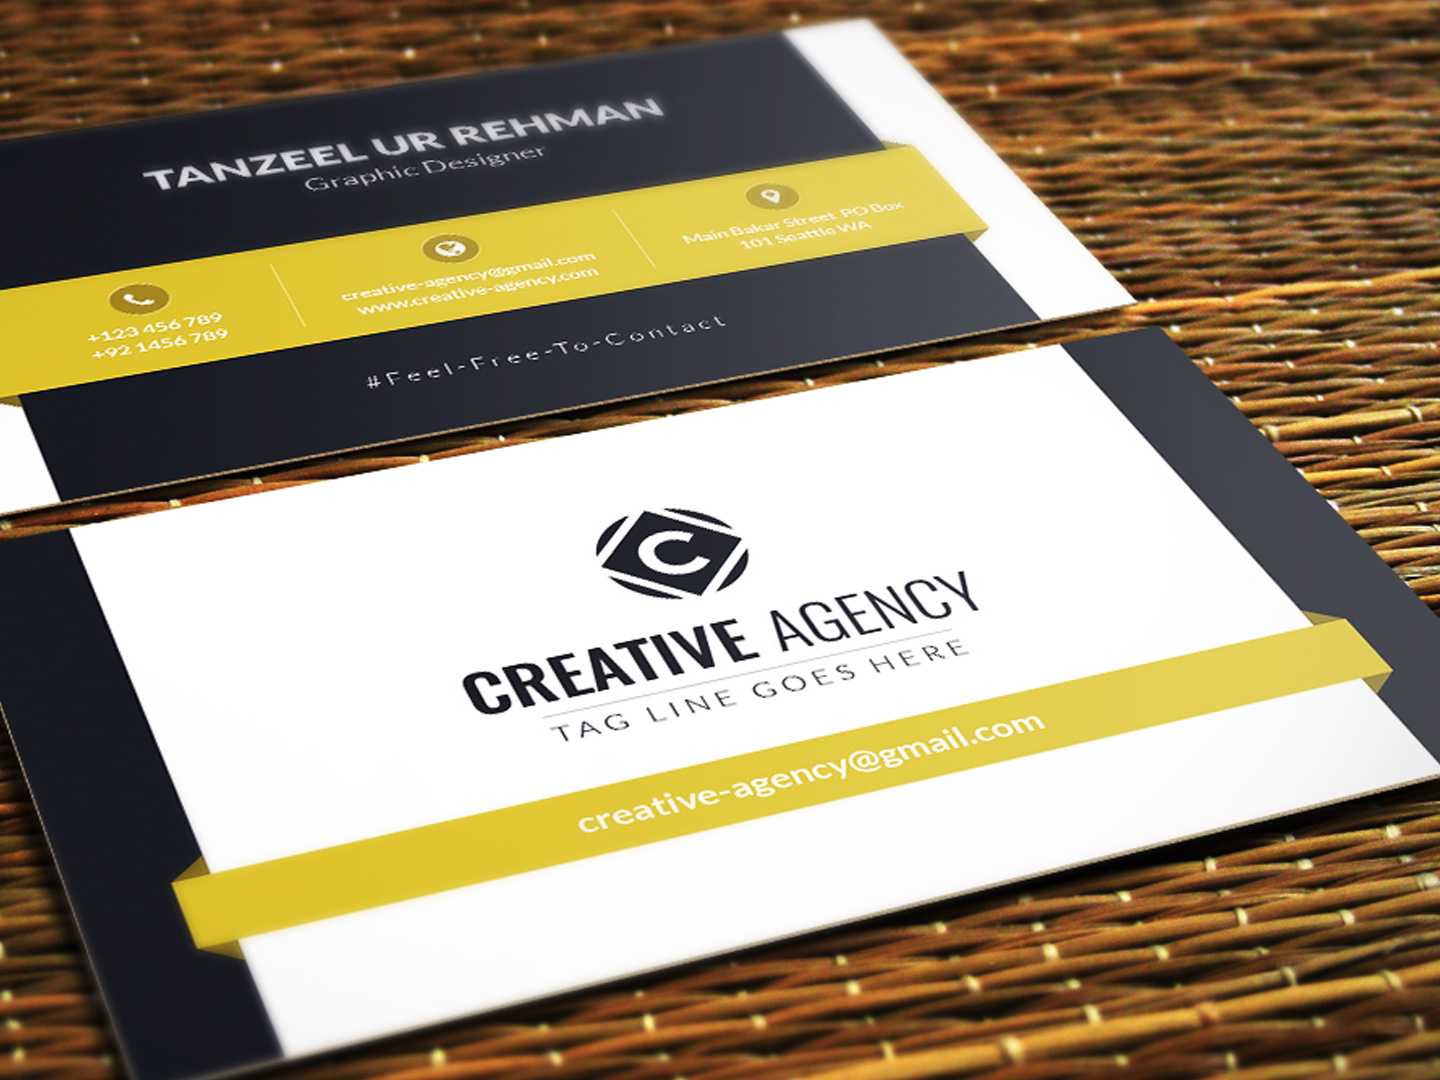 Business Cards Template – Free Downloadtanzeel Ur Rehman Intended For Visiting Card Templates Download